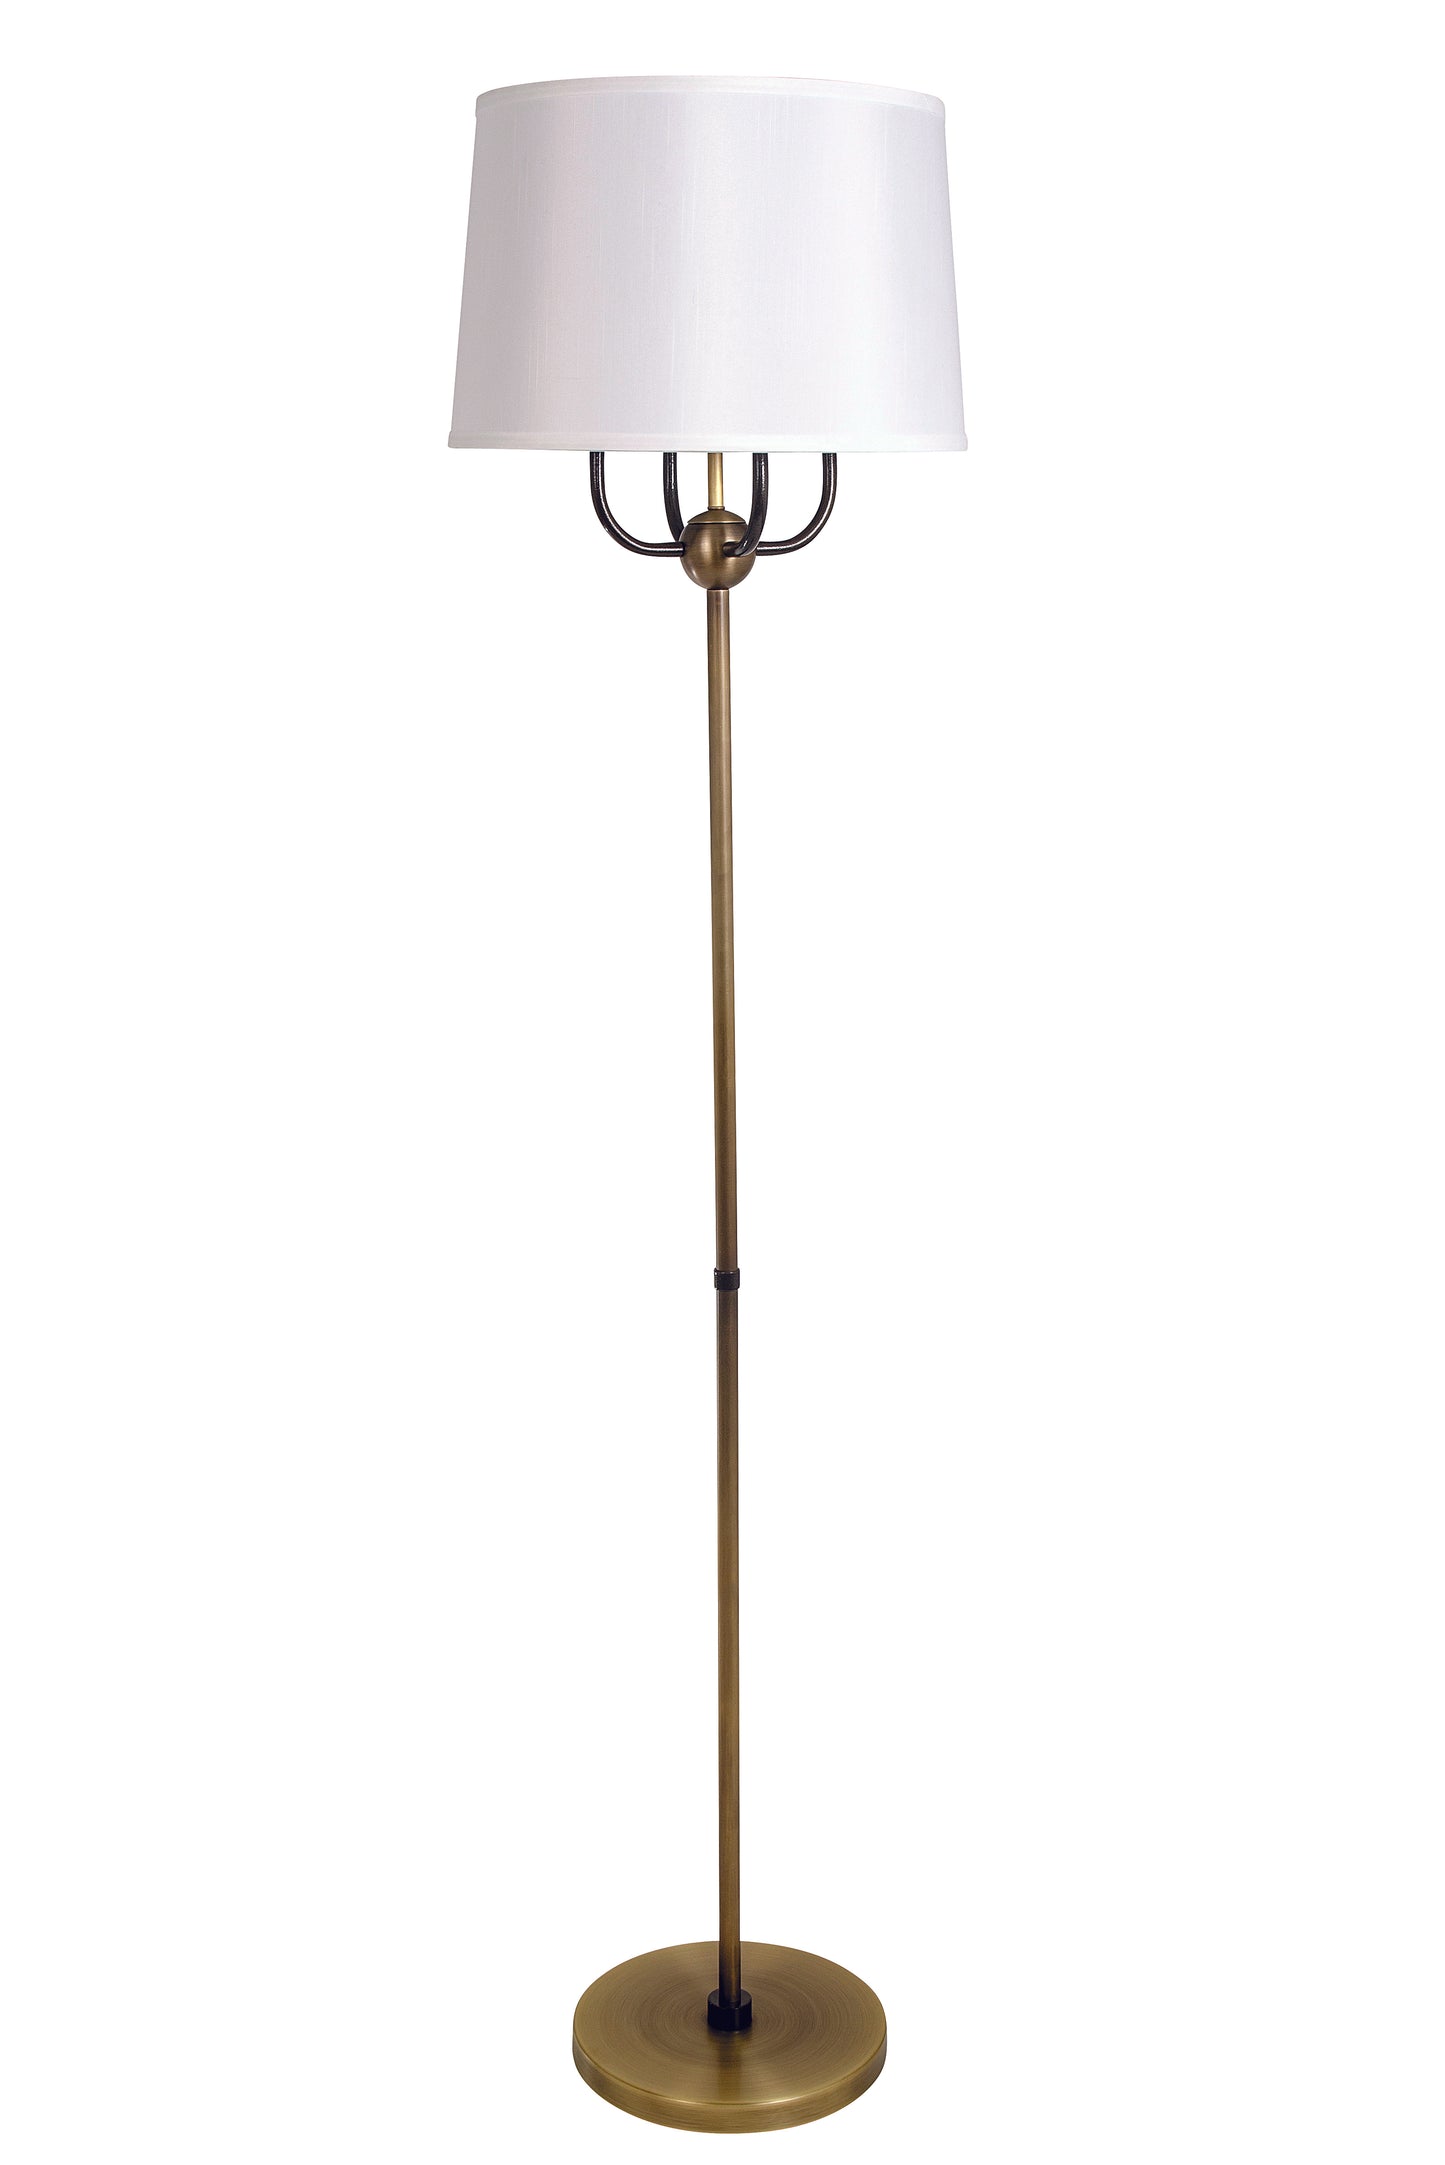 House of Troy Alpine 4-Light Cluster Antique Brass Hammered Bronze Accent Floor Lamp A701-AB-HB